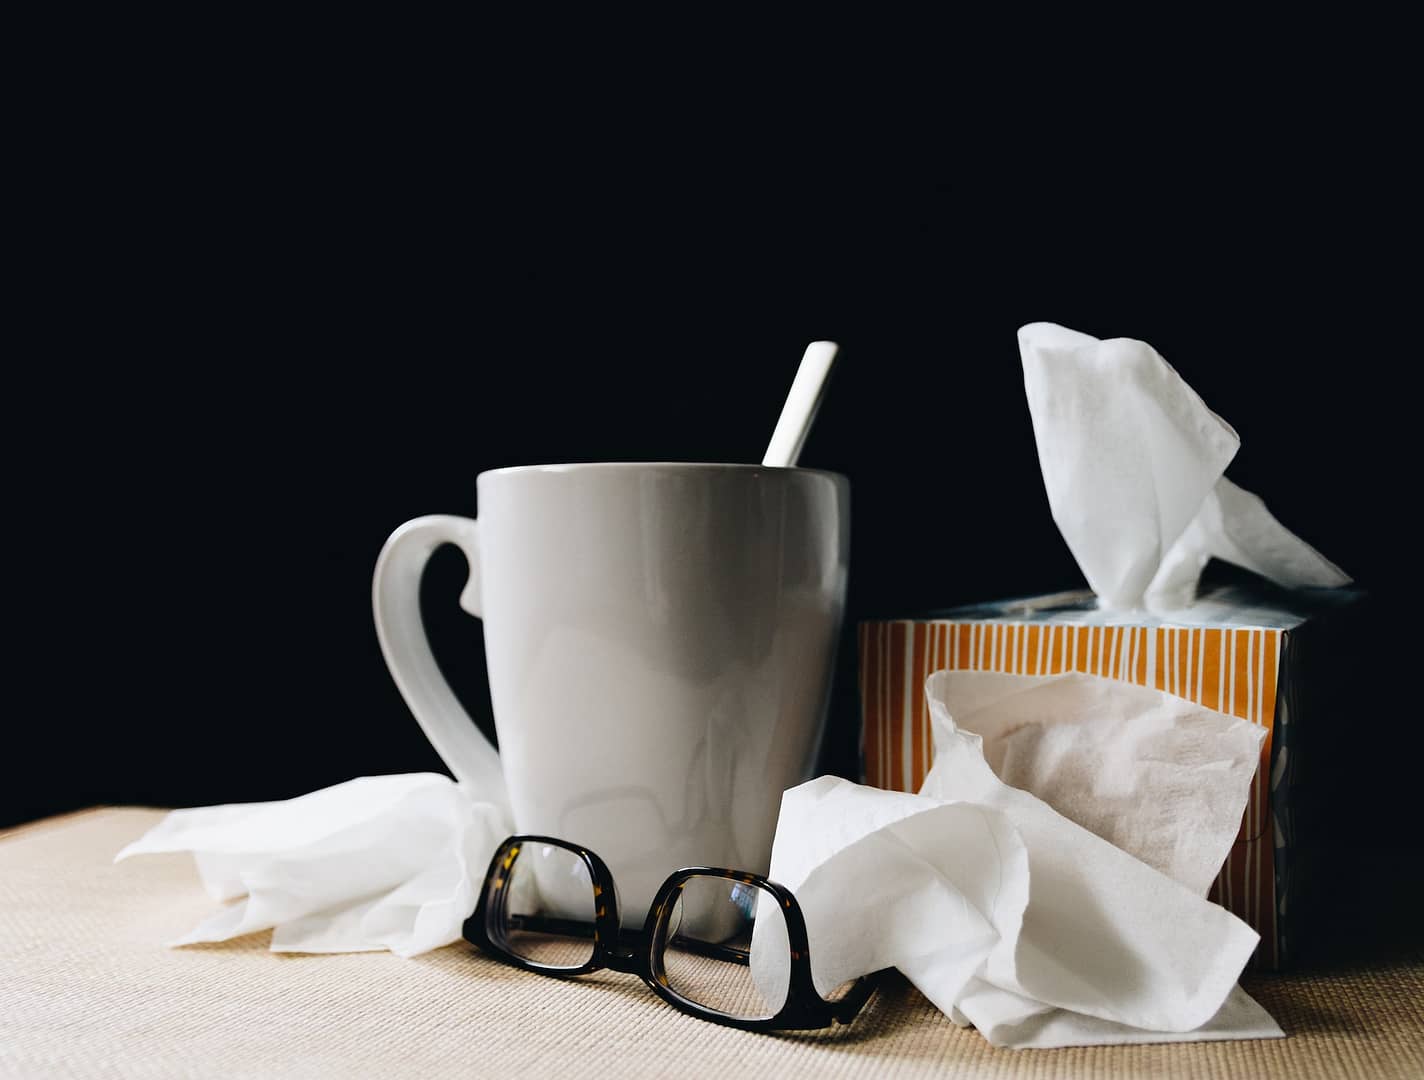 tissues and a mug on a bedside table